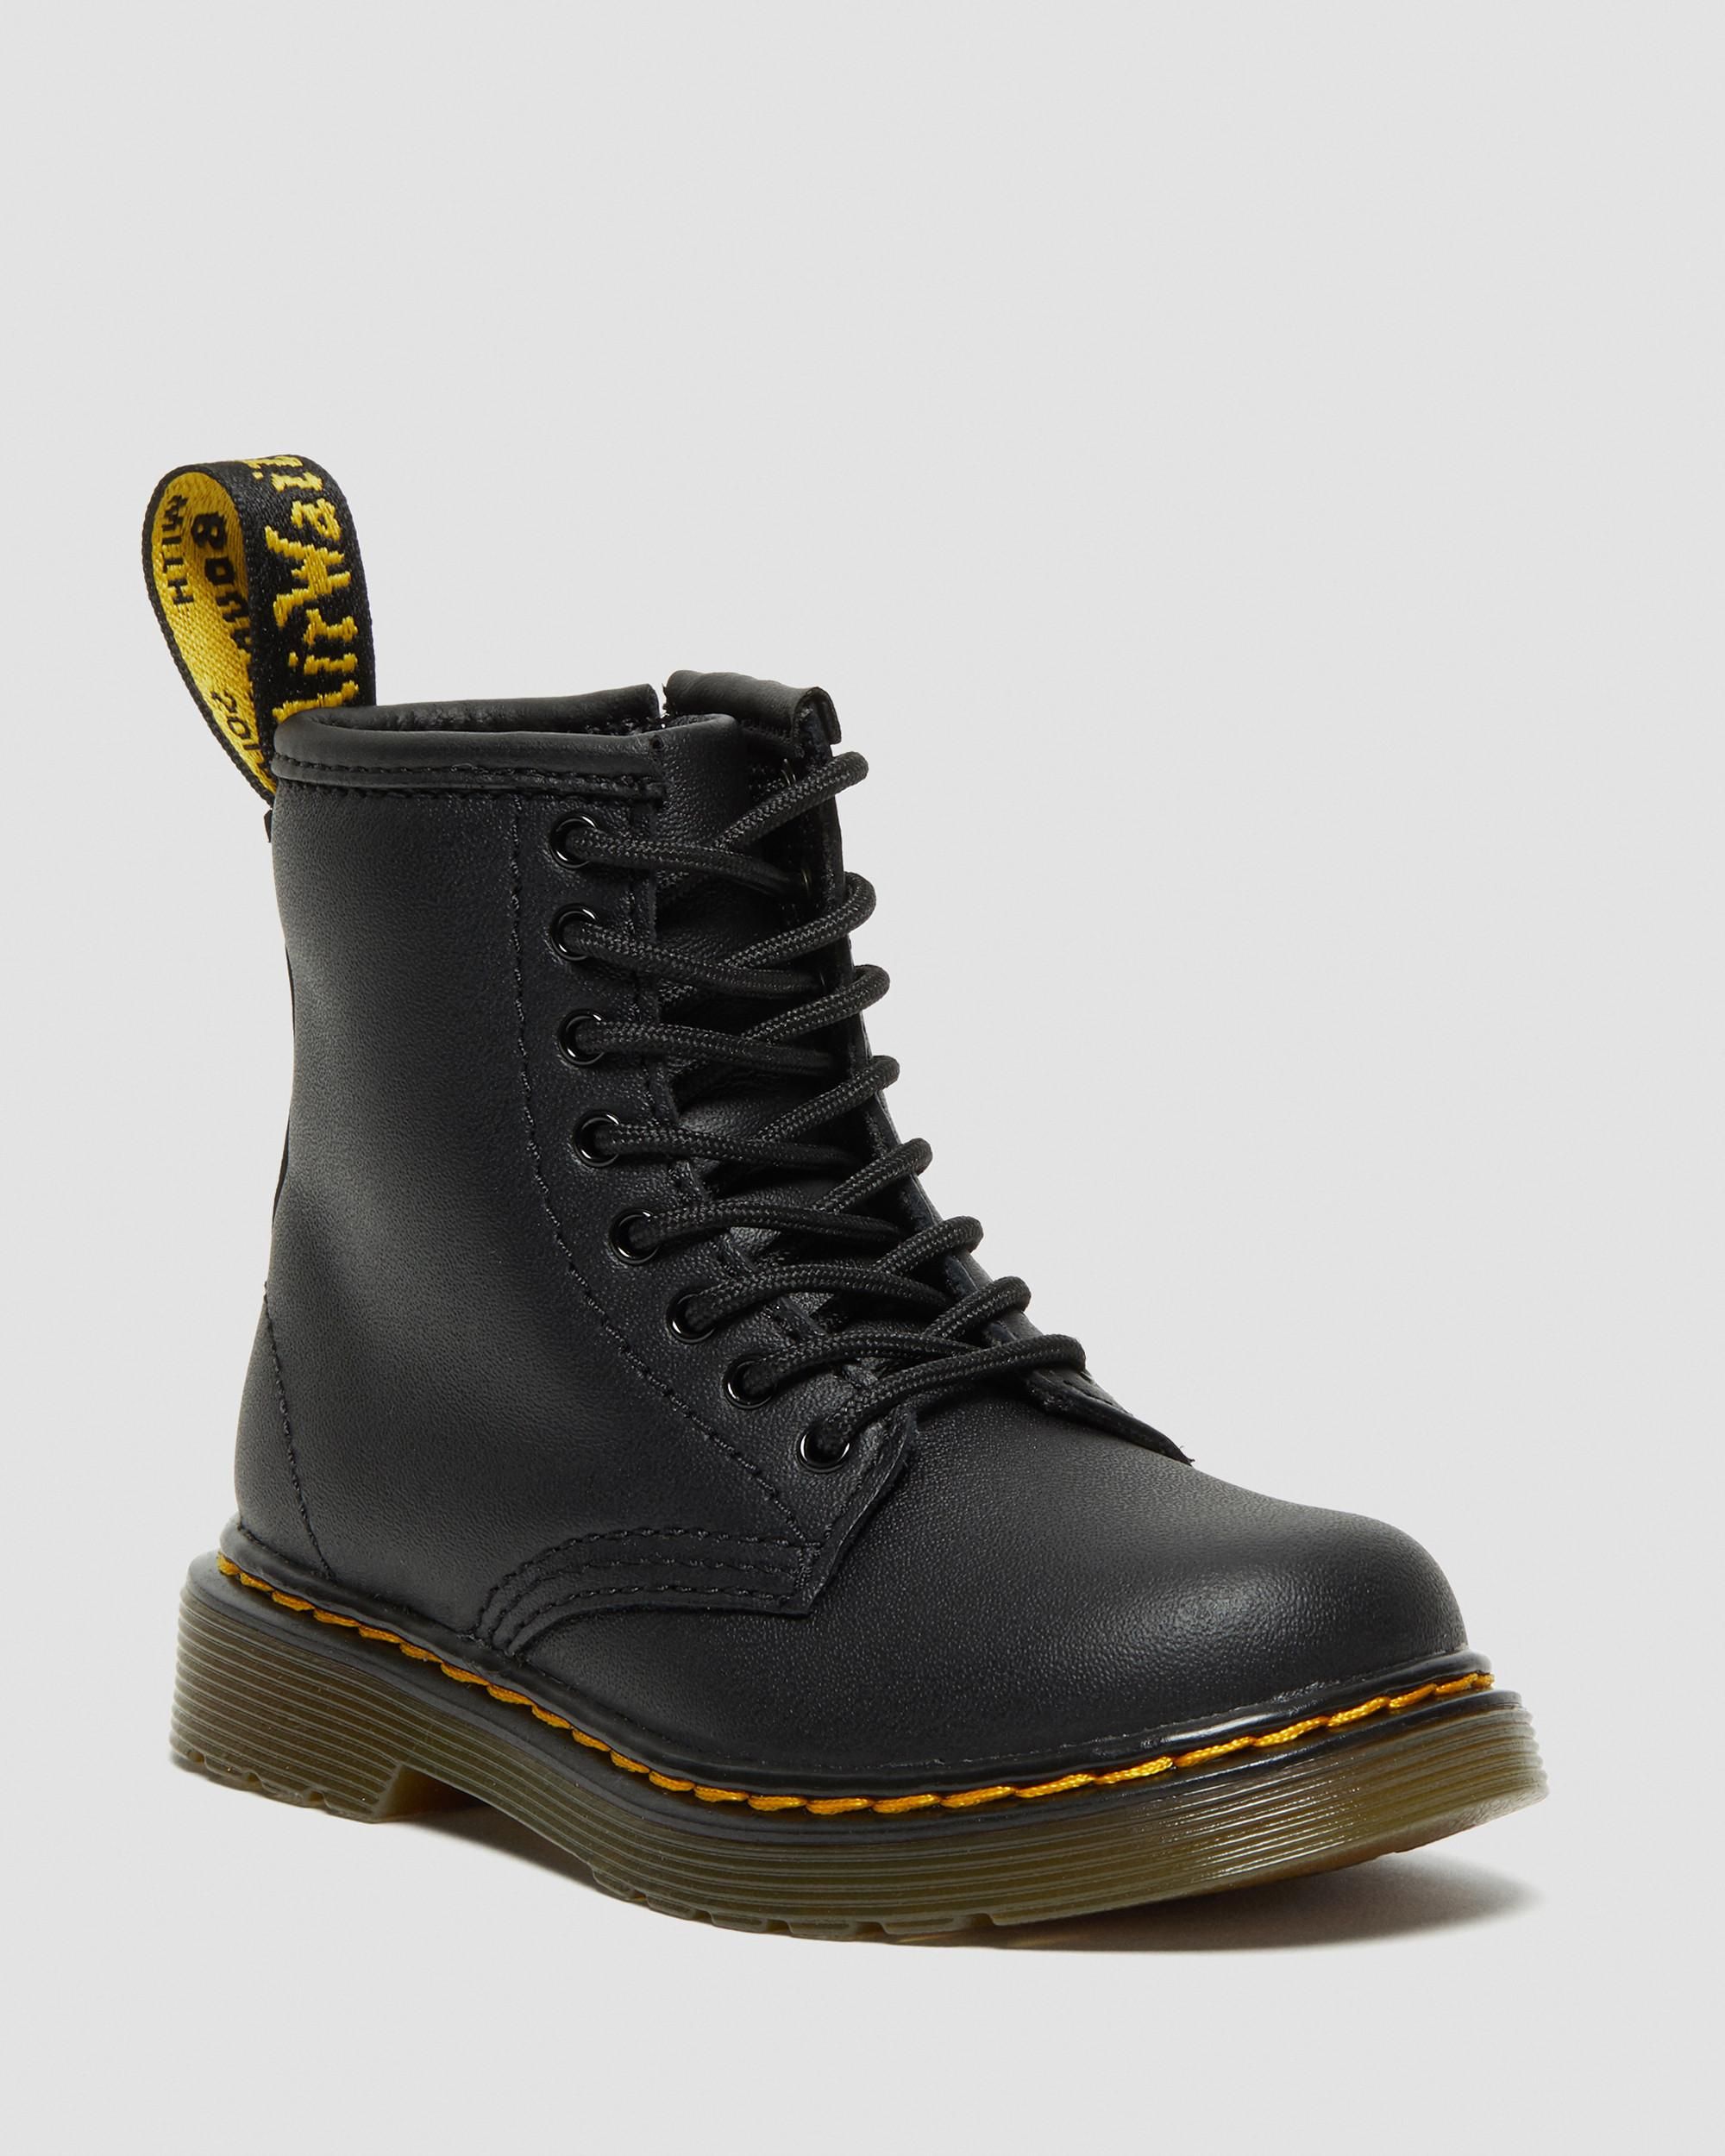 Toddler 1460 Softy T Leather Lace Up Boots | Dr. Martens